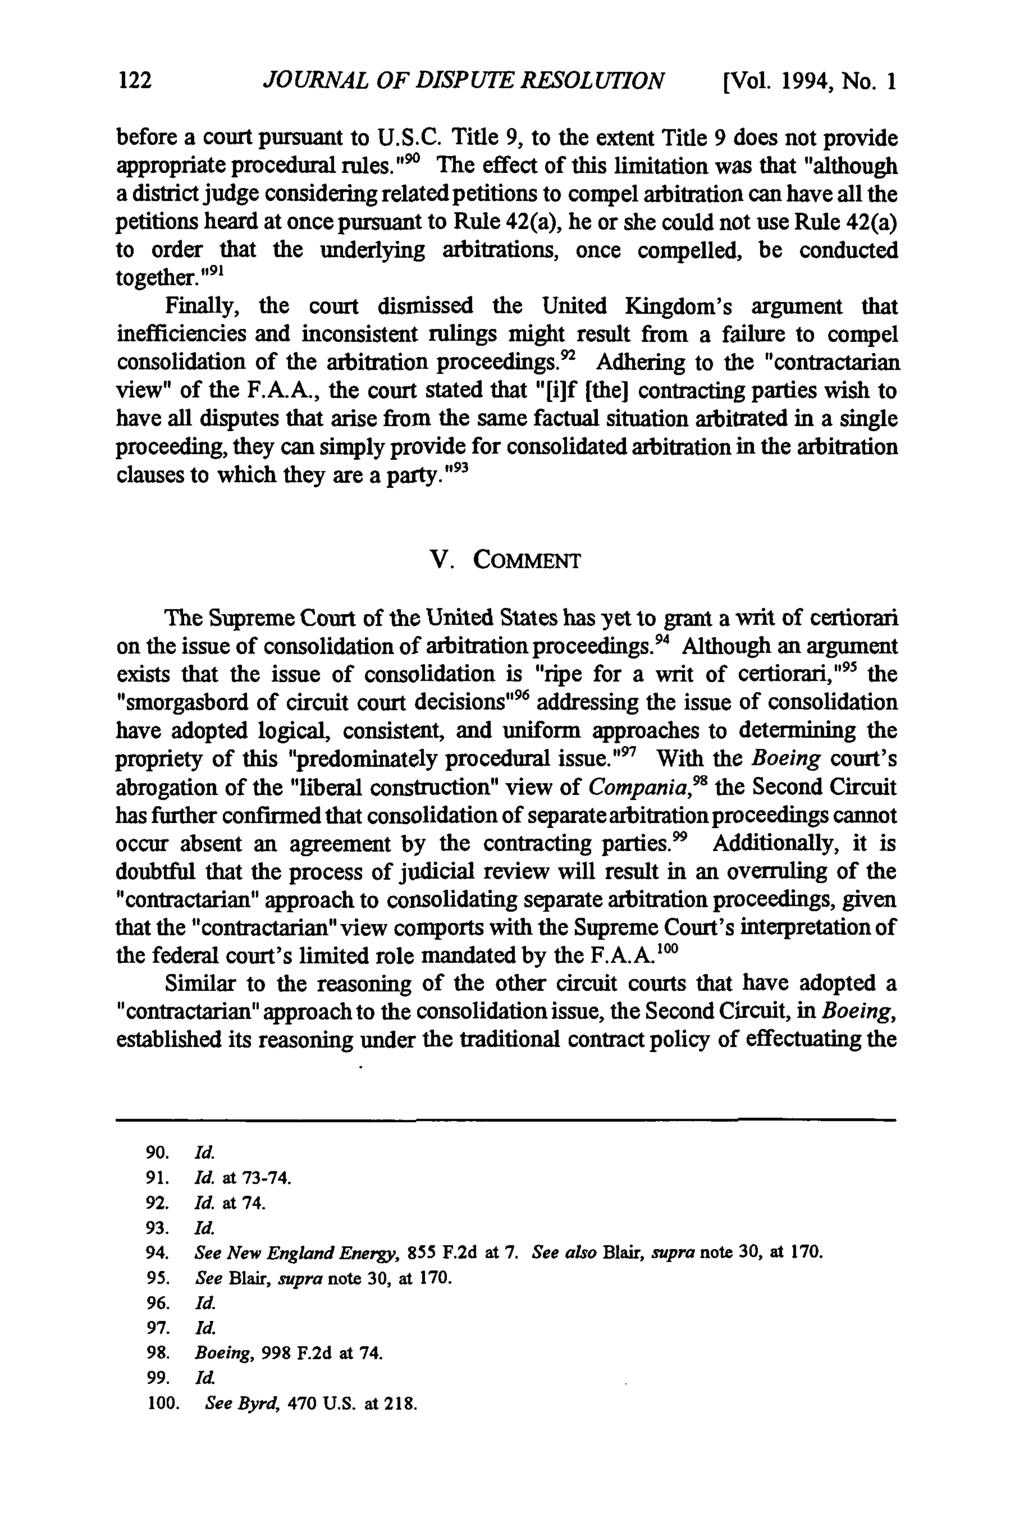 Journal of Dispute Resolution, Vol. 1994, Iss. 1 [1994], Art. 11 JOURNAL OF DISPUTE RESOL U7ION [Vol. 1994, No. I before a court pursuant to U.S.C.